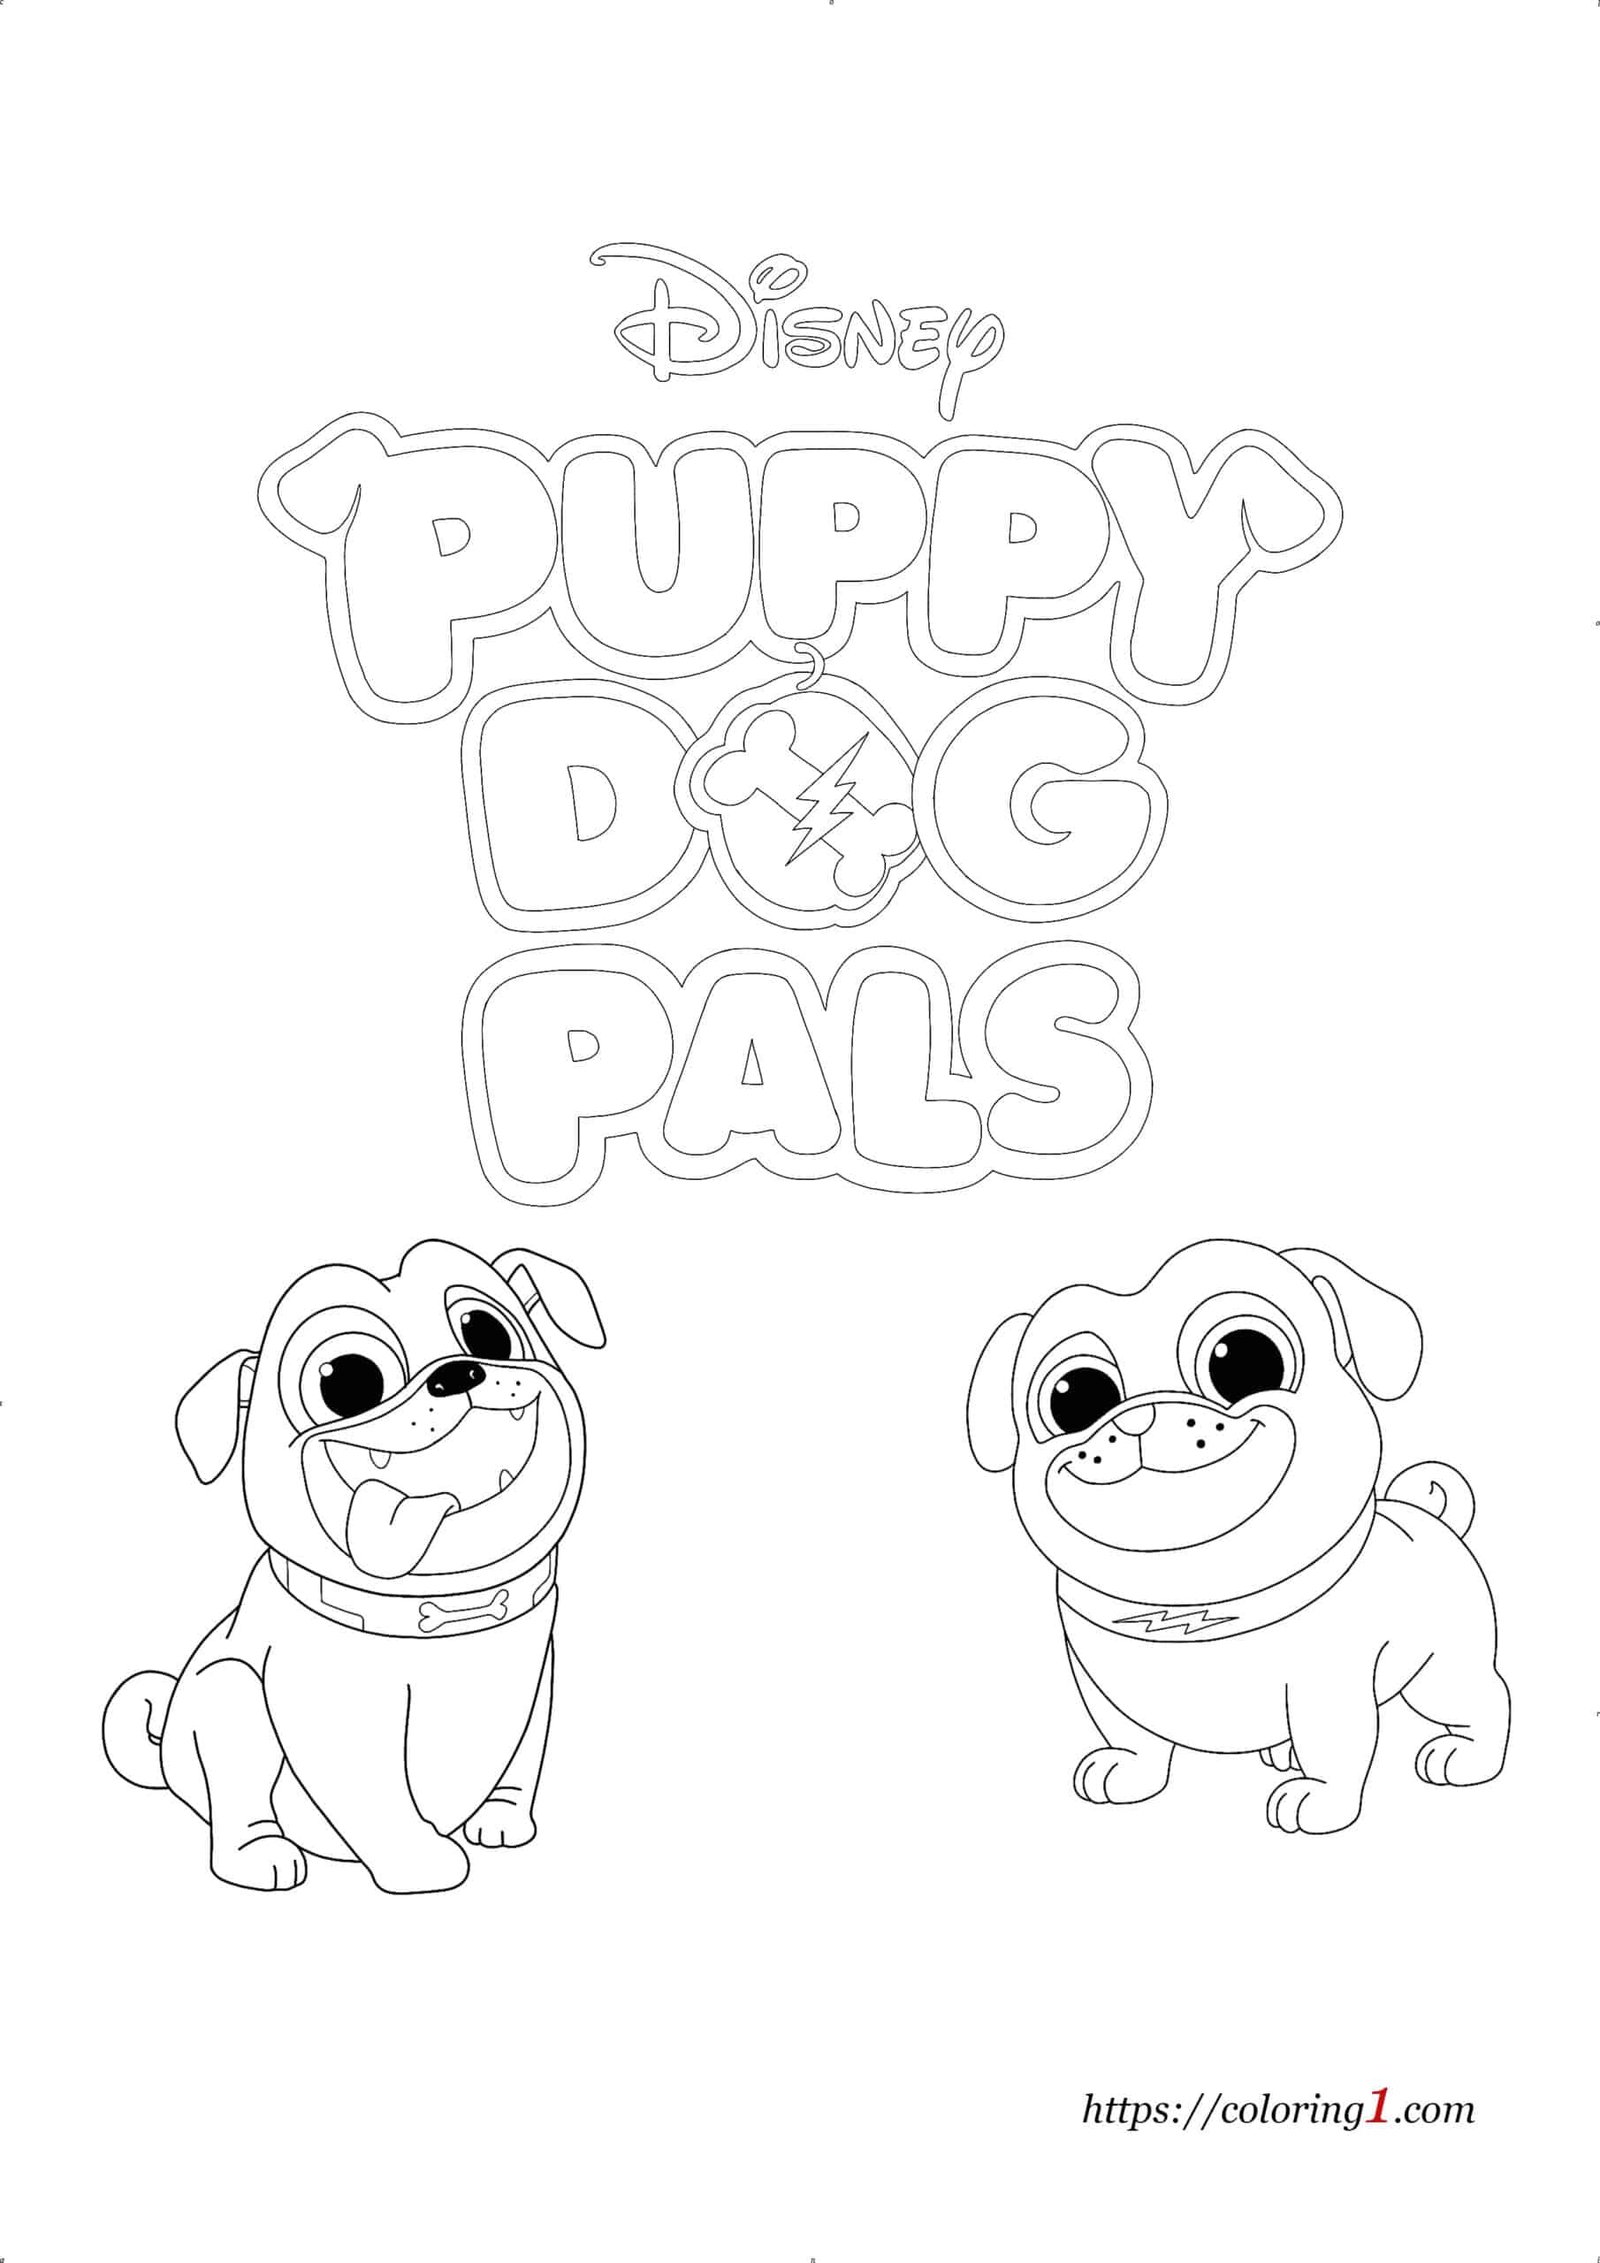 Puppy Dog Pals coloring page